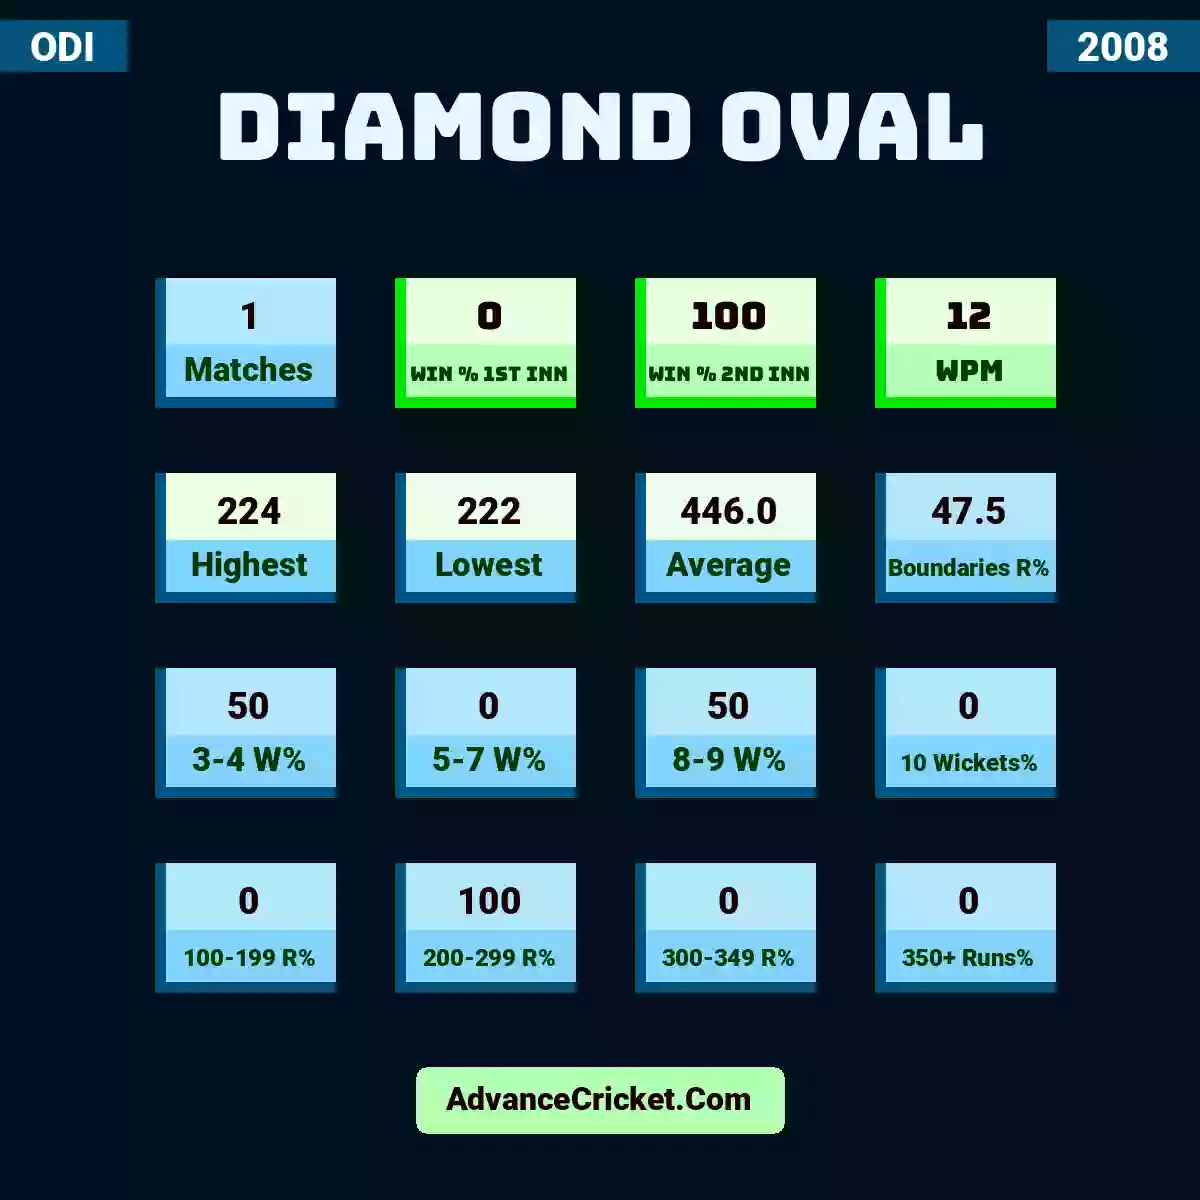 Image showing Diamond Oval with Matches: 1, Win % 1st Inn: 0, Win % 2nd Inn: 100, WPM: 12, Highest: 224, Lowest: 222, Average: 446.0, Boundaries R%: 47.5, 3-4 W%: 50, 5-7 W%: 0, 8-9 W%: 50, 10 Wickets%: 0, 100-199 R%: 0, 200-299 R%: 100, 300-349 R%: 0, 350+ Runs%: 0.